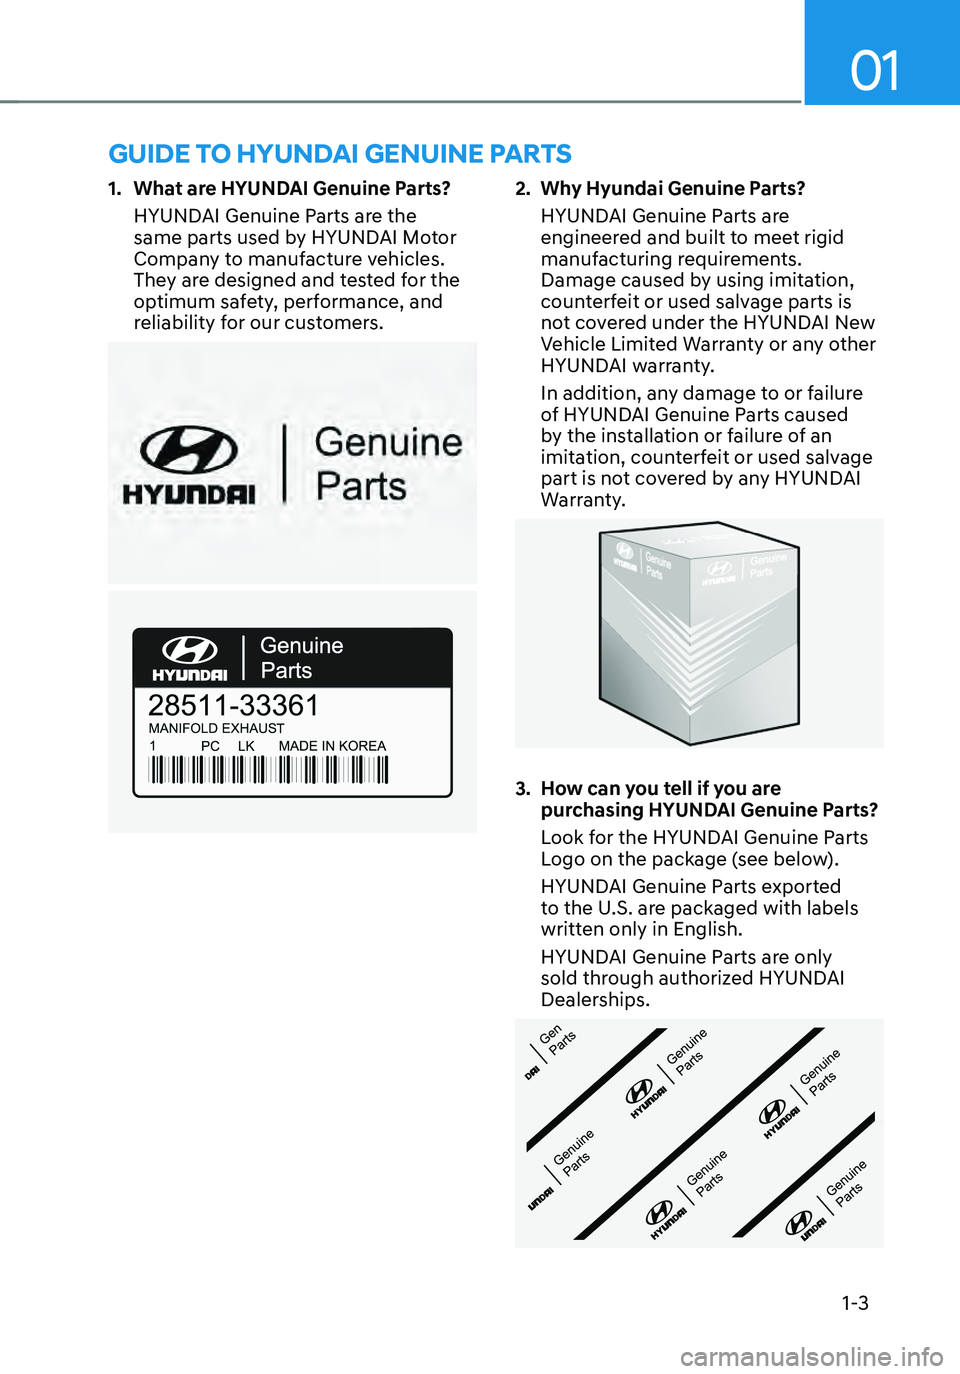 HYUNDAI TUCSON HYBRID 2022  Owners Manual 01
1-3
GUIDE TO HYUNDAI GENUINE PARTS
1. What are HYUNDAI Genuine Parts?
HYUNDAI Genuine Parts are the 
same parts used by HYUNDAI Motor 
Company to manufacture vehicles. 
They are designed and tested